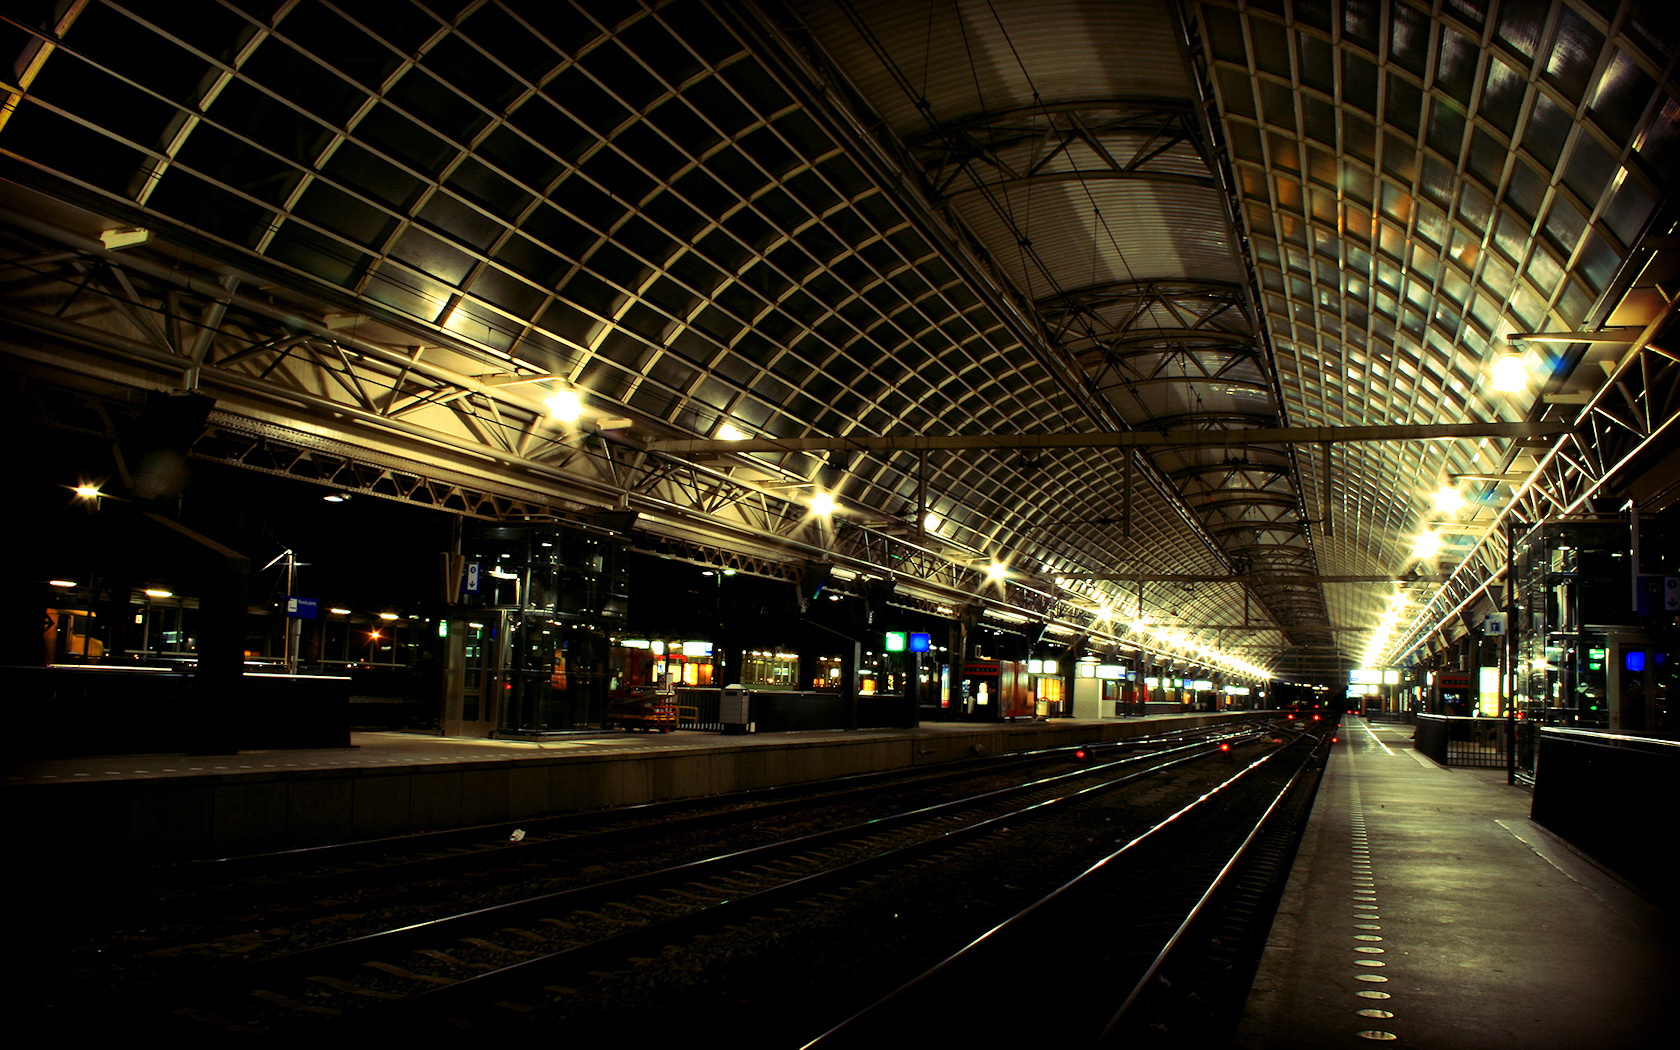 Railway station wallpapers and images - wallpapers, pictures, photos